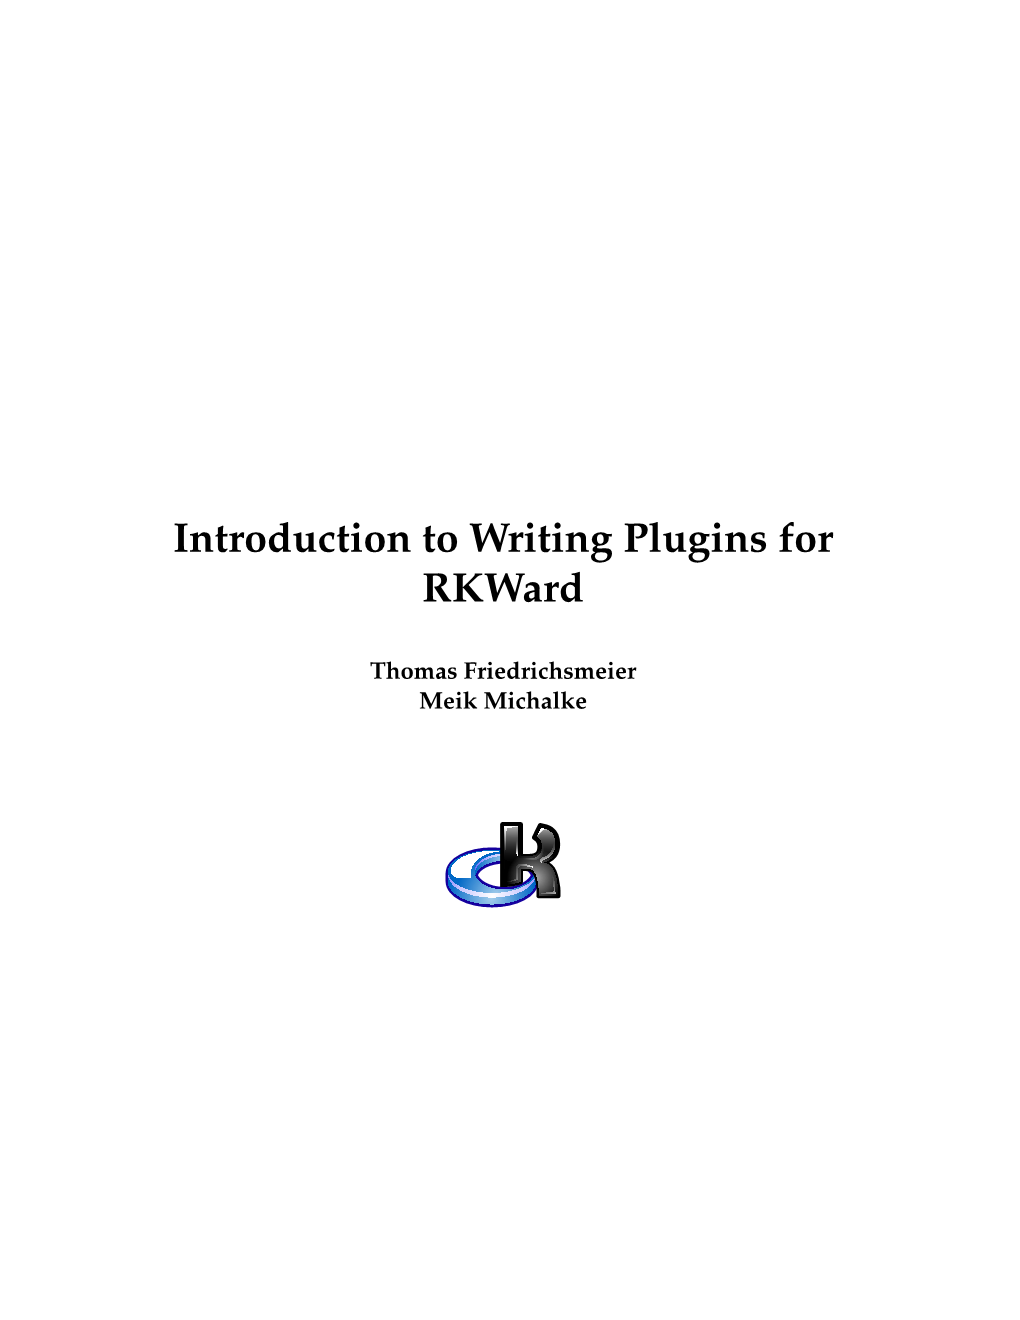 Introduction to Writing Plugins for Rkward